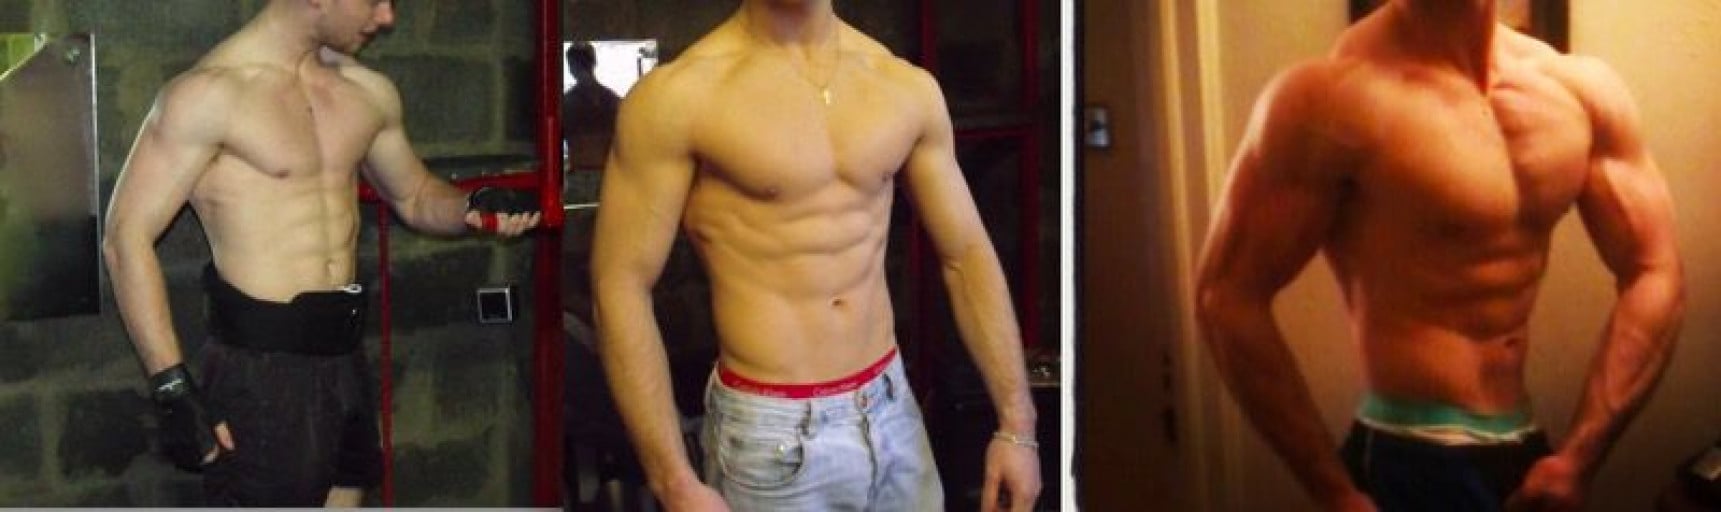 A before and after photo of a 6'0" male showing a muscle gain from 169 pounds to 200 pounds. A net gain of 31 pounds.